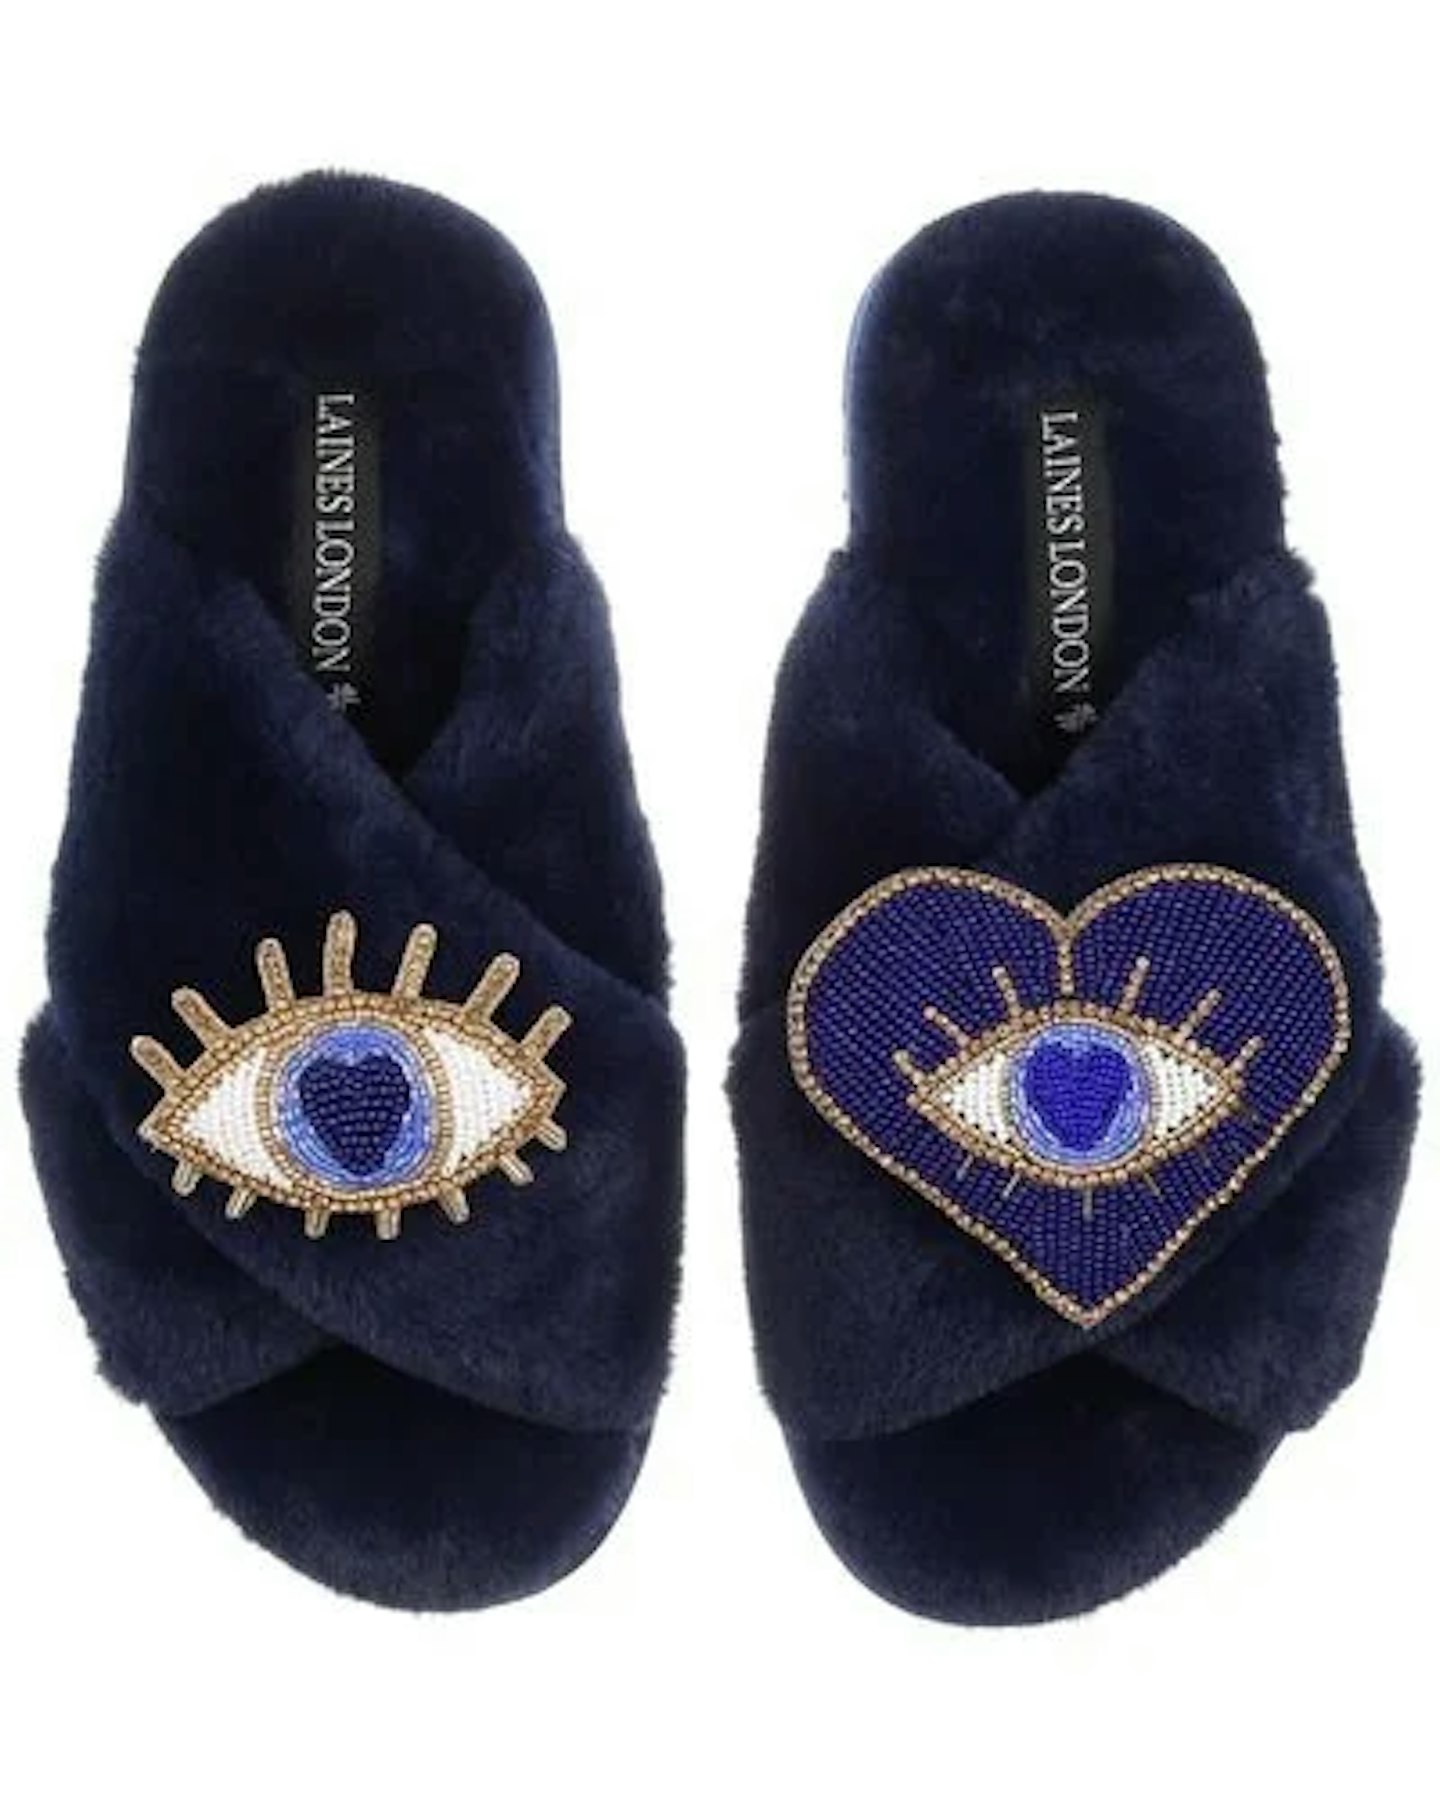 Classic Laines Slippers With Double Blue & Gold Eye Brooches